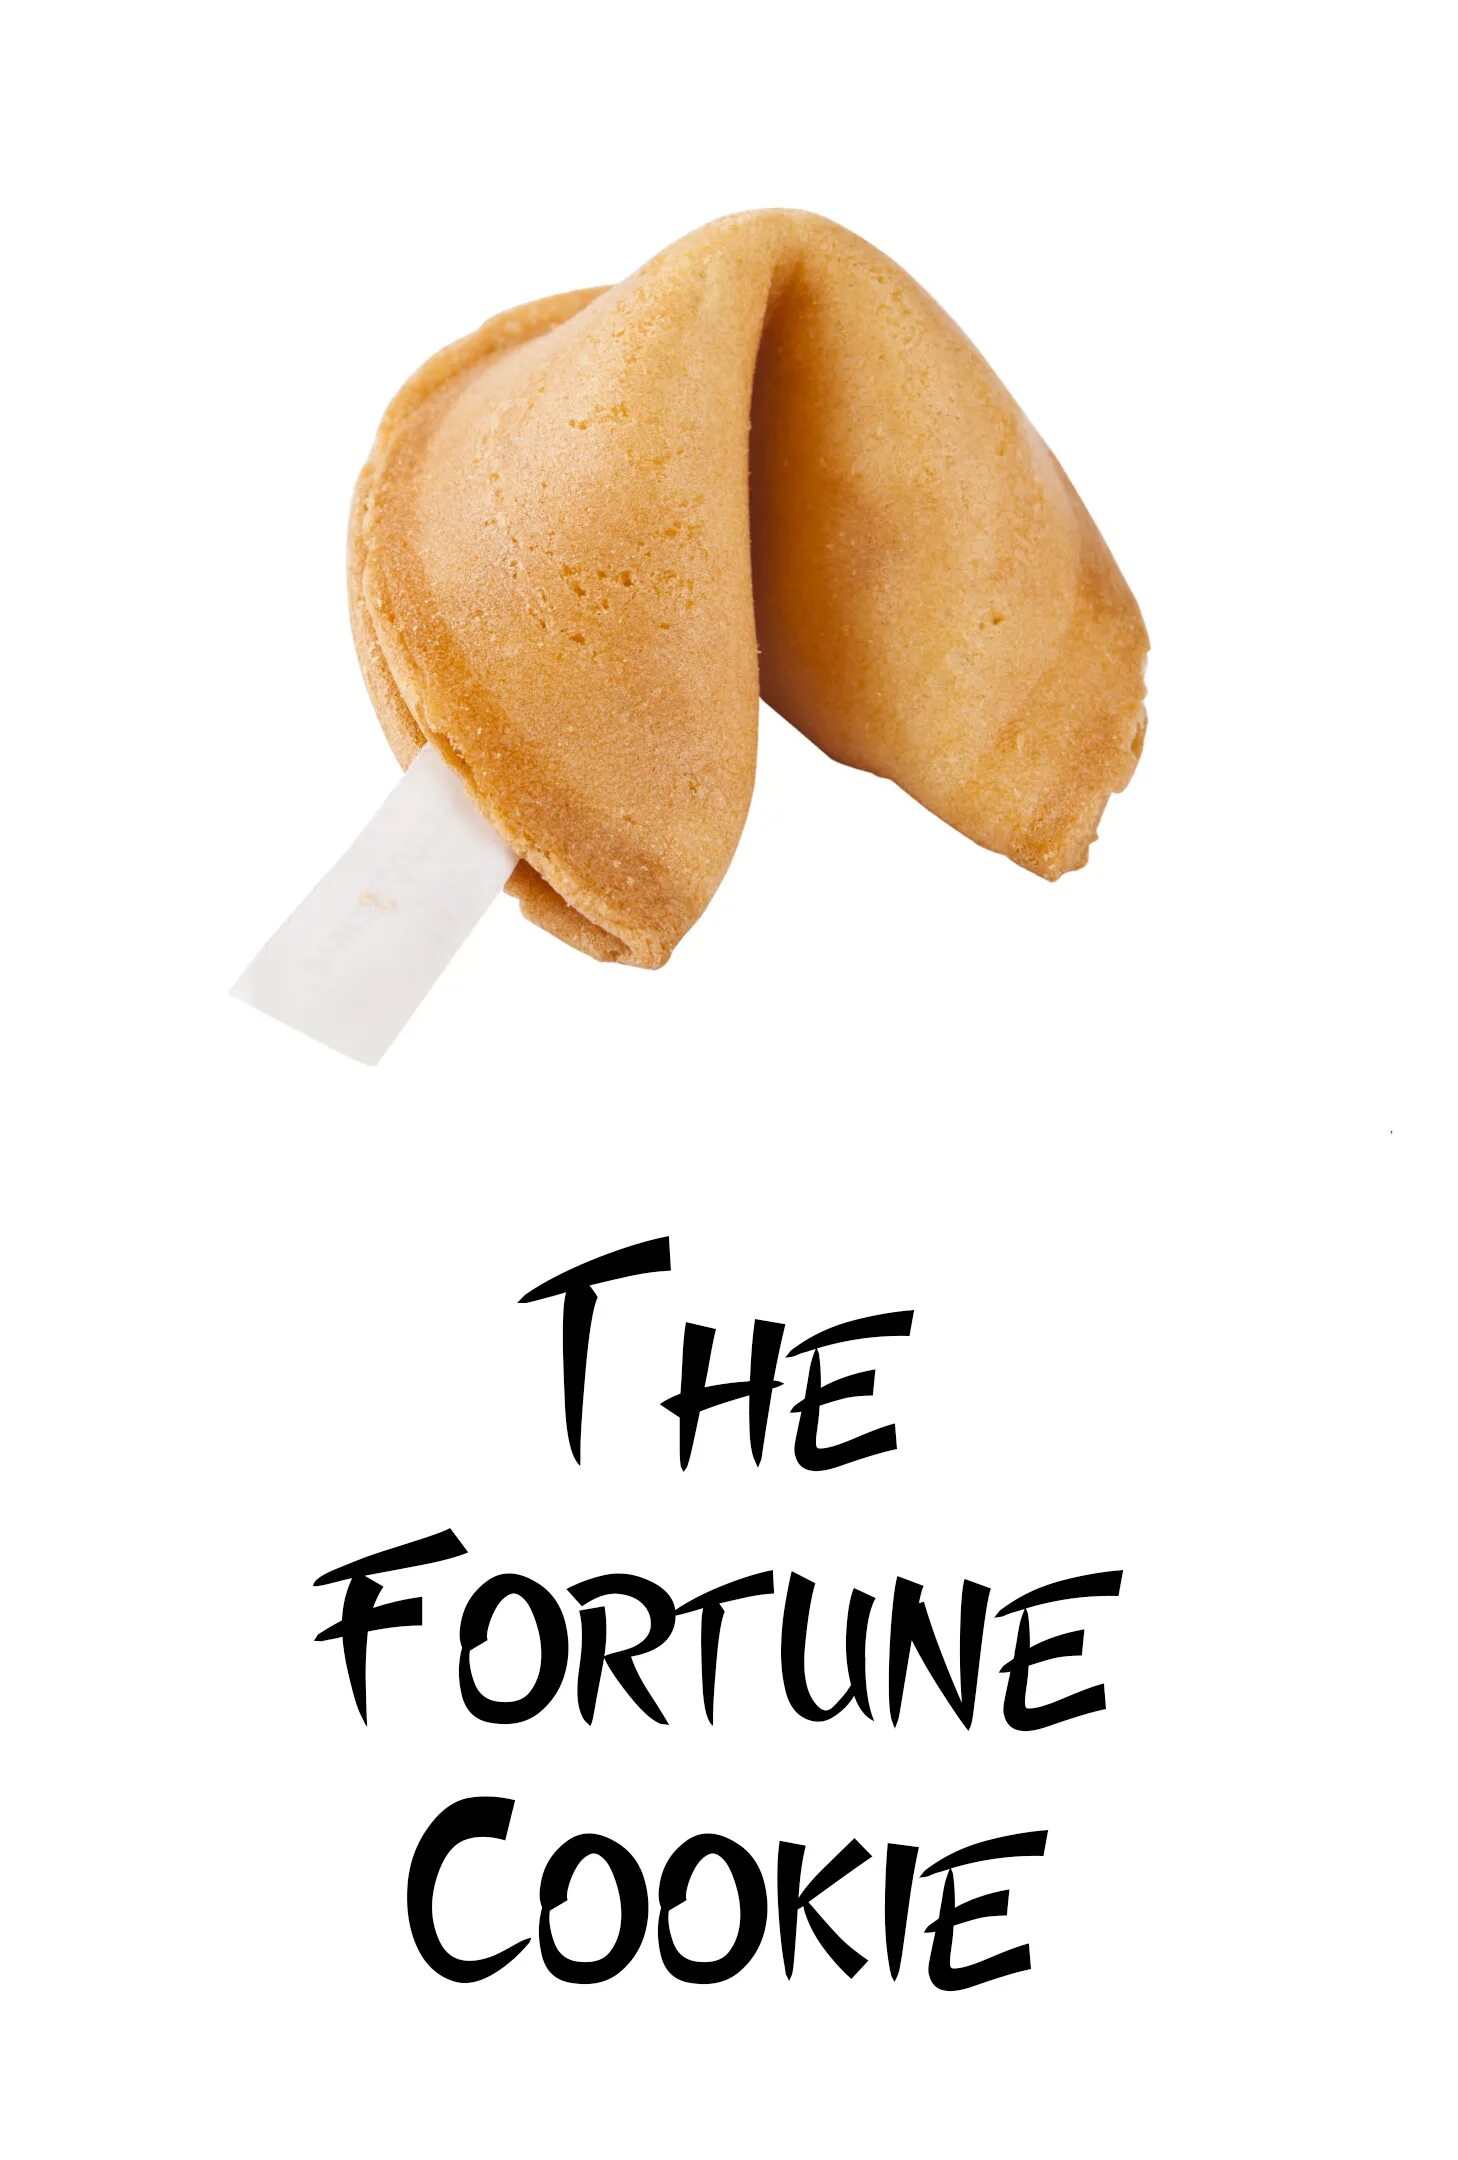 Fortune cookie. Fortune cookies writer. Fortune cookie China. Fortune cookies